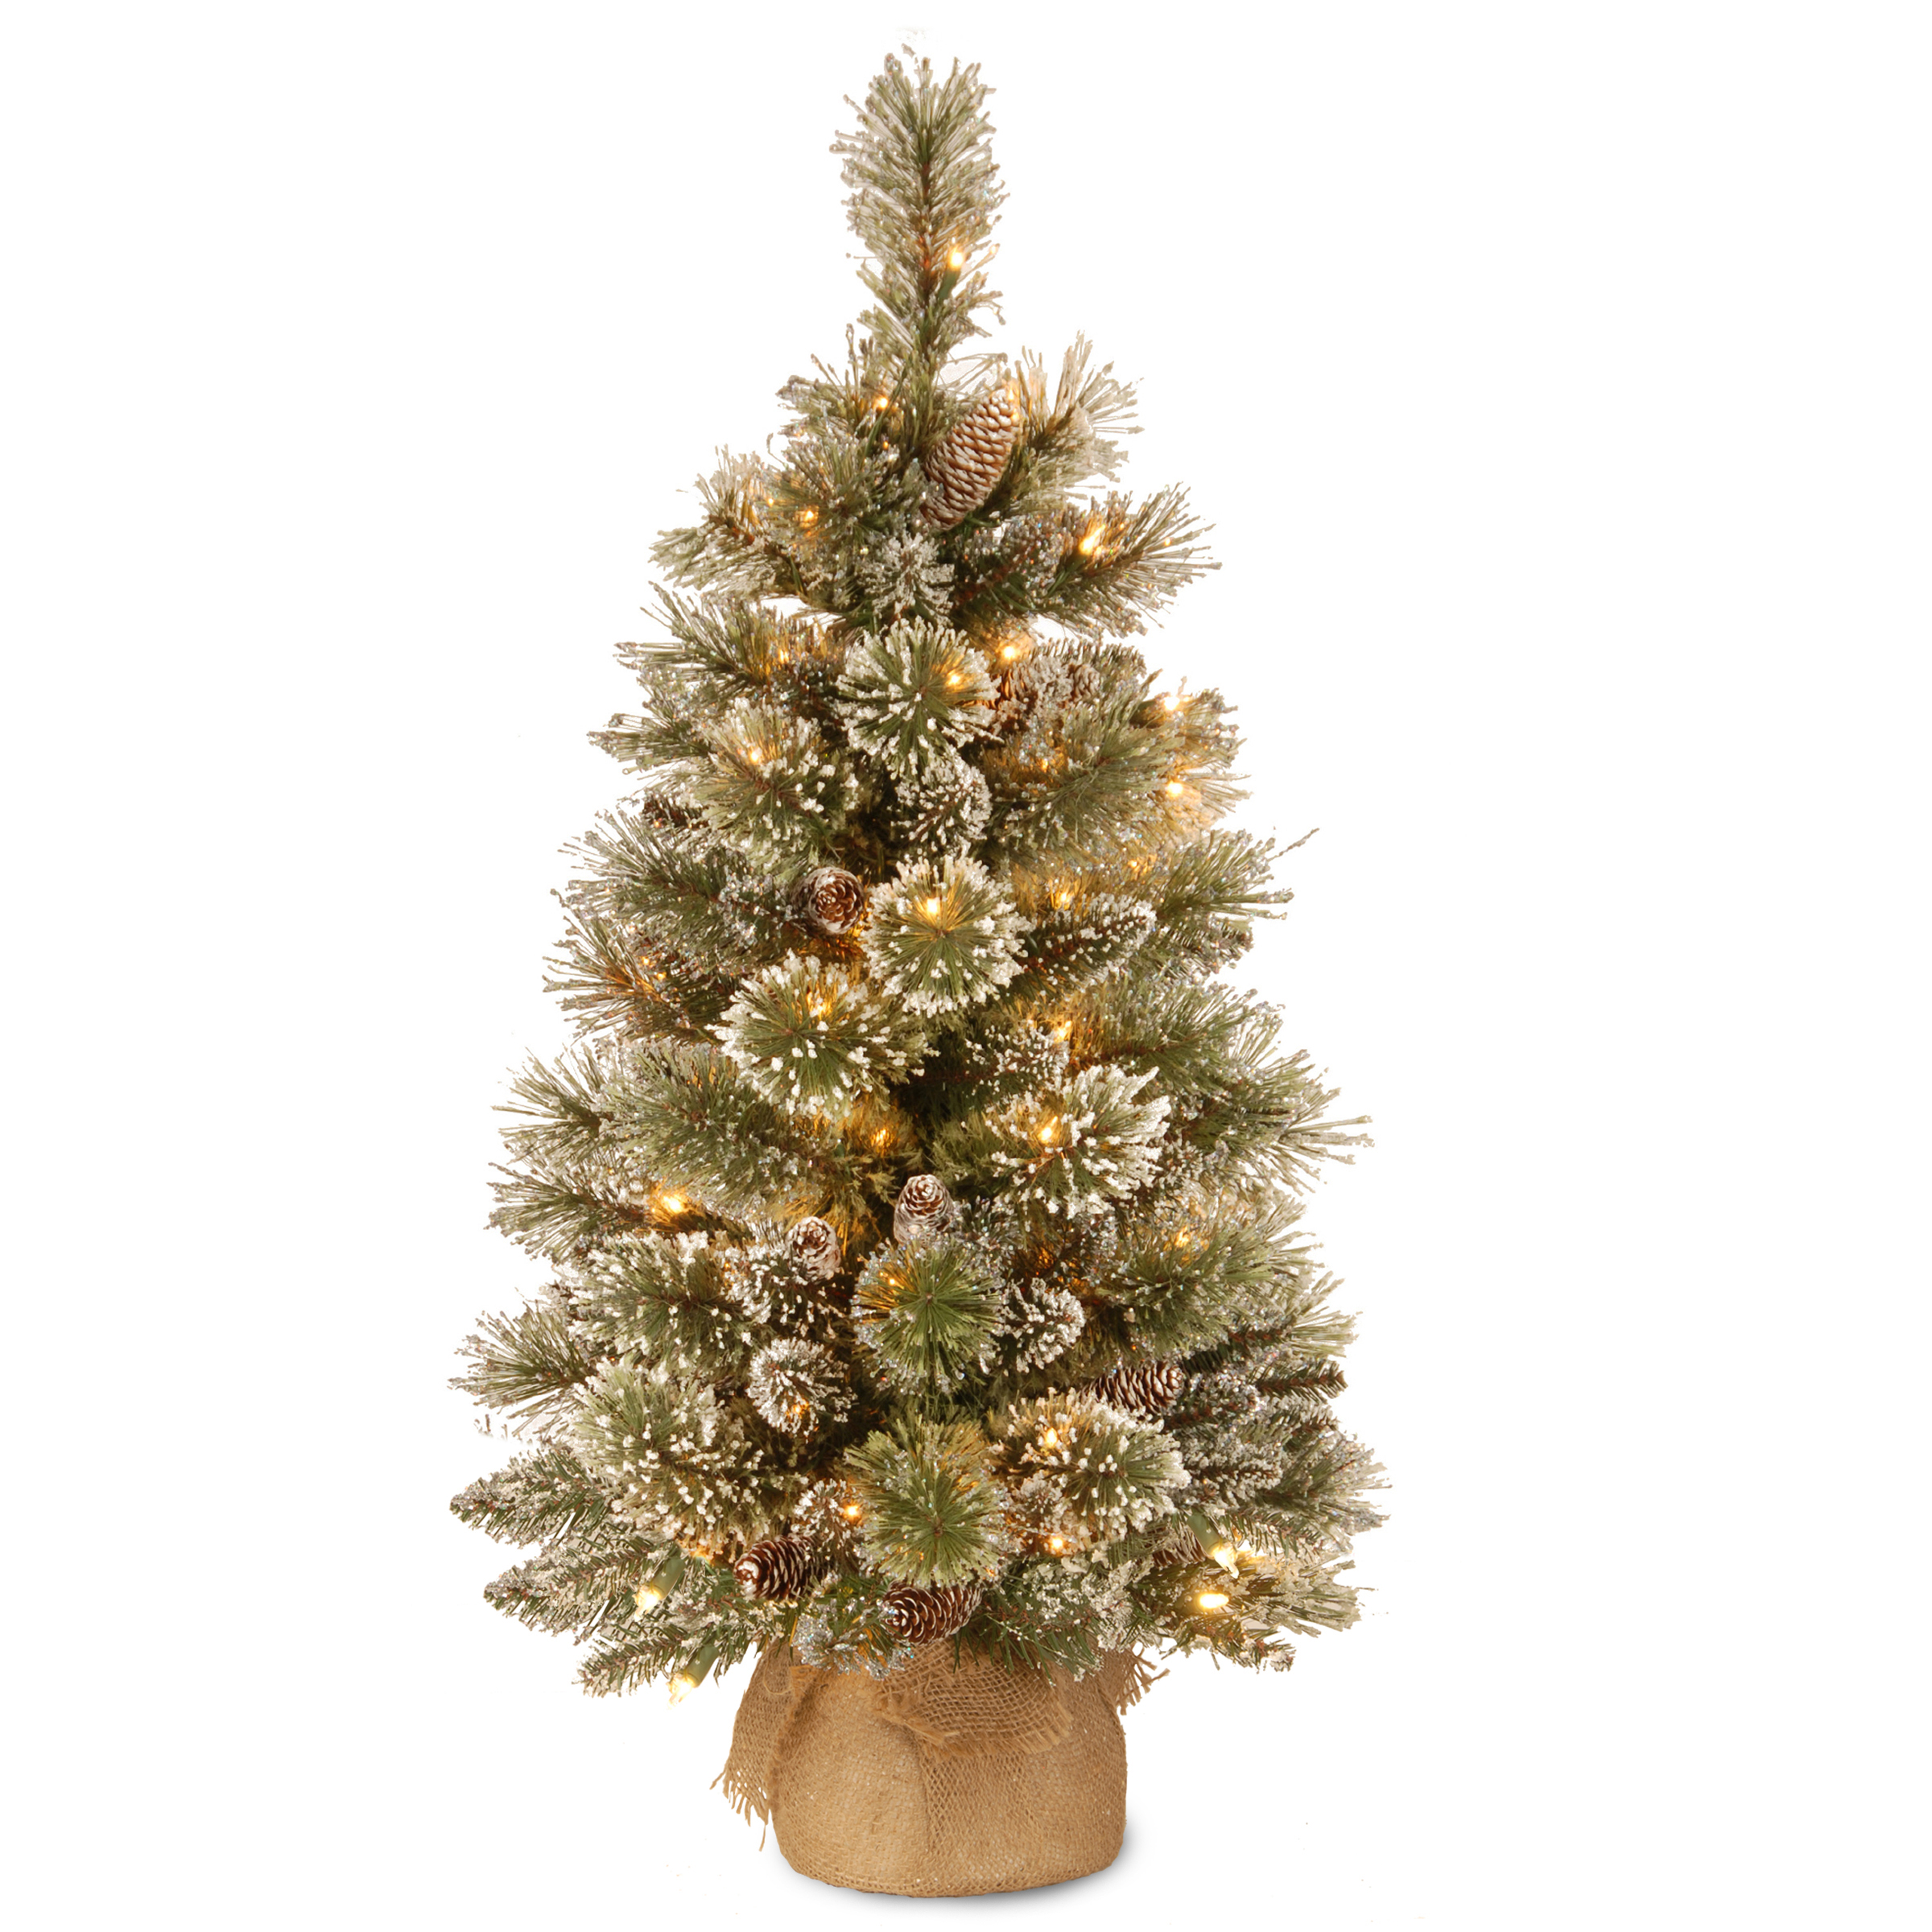 National Tree Co. 3' Glittery Bristle Pine Burlap Tree with 7 White Tipped Cones & 35 Warm White Battery Operated LED Lights w/Timer